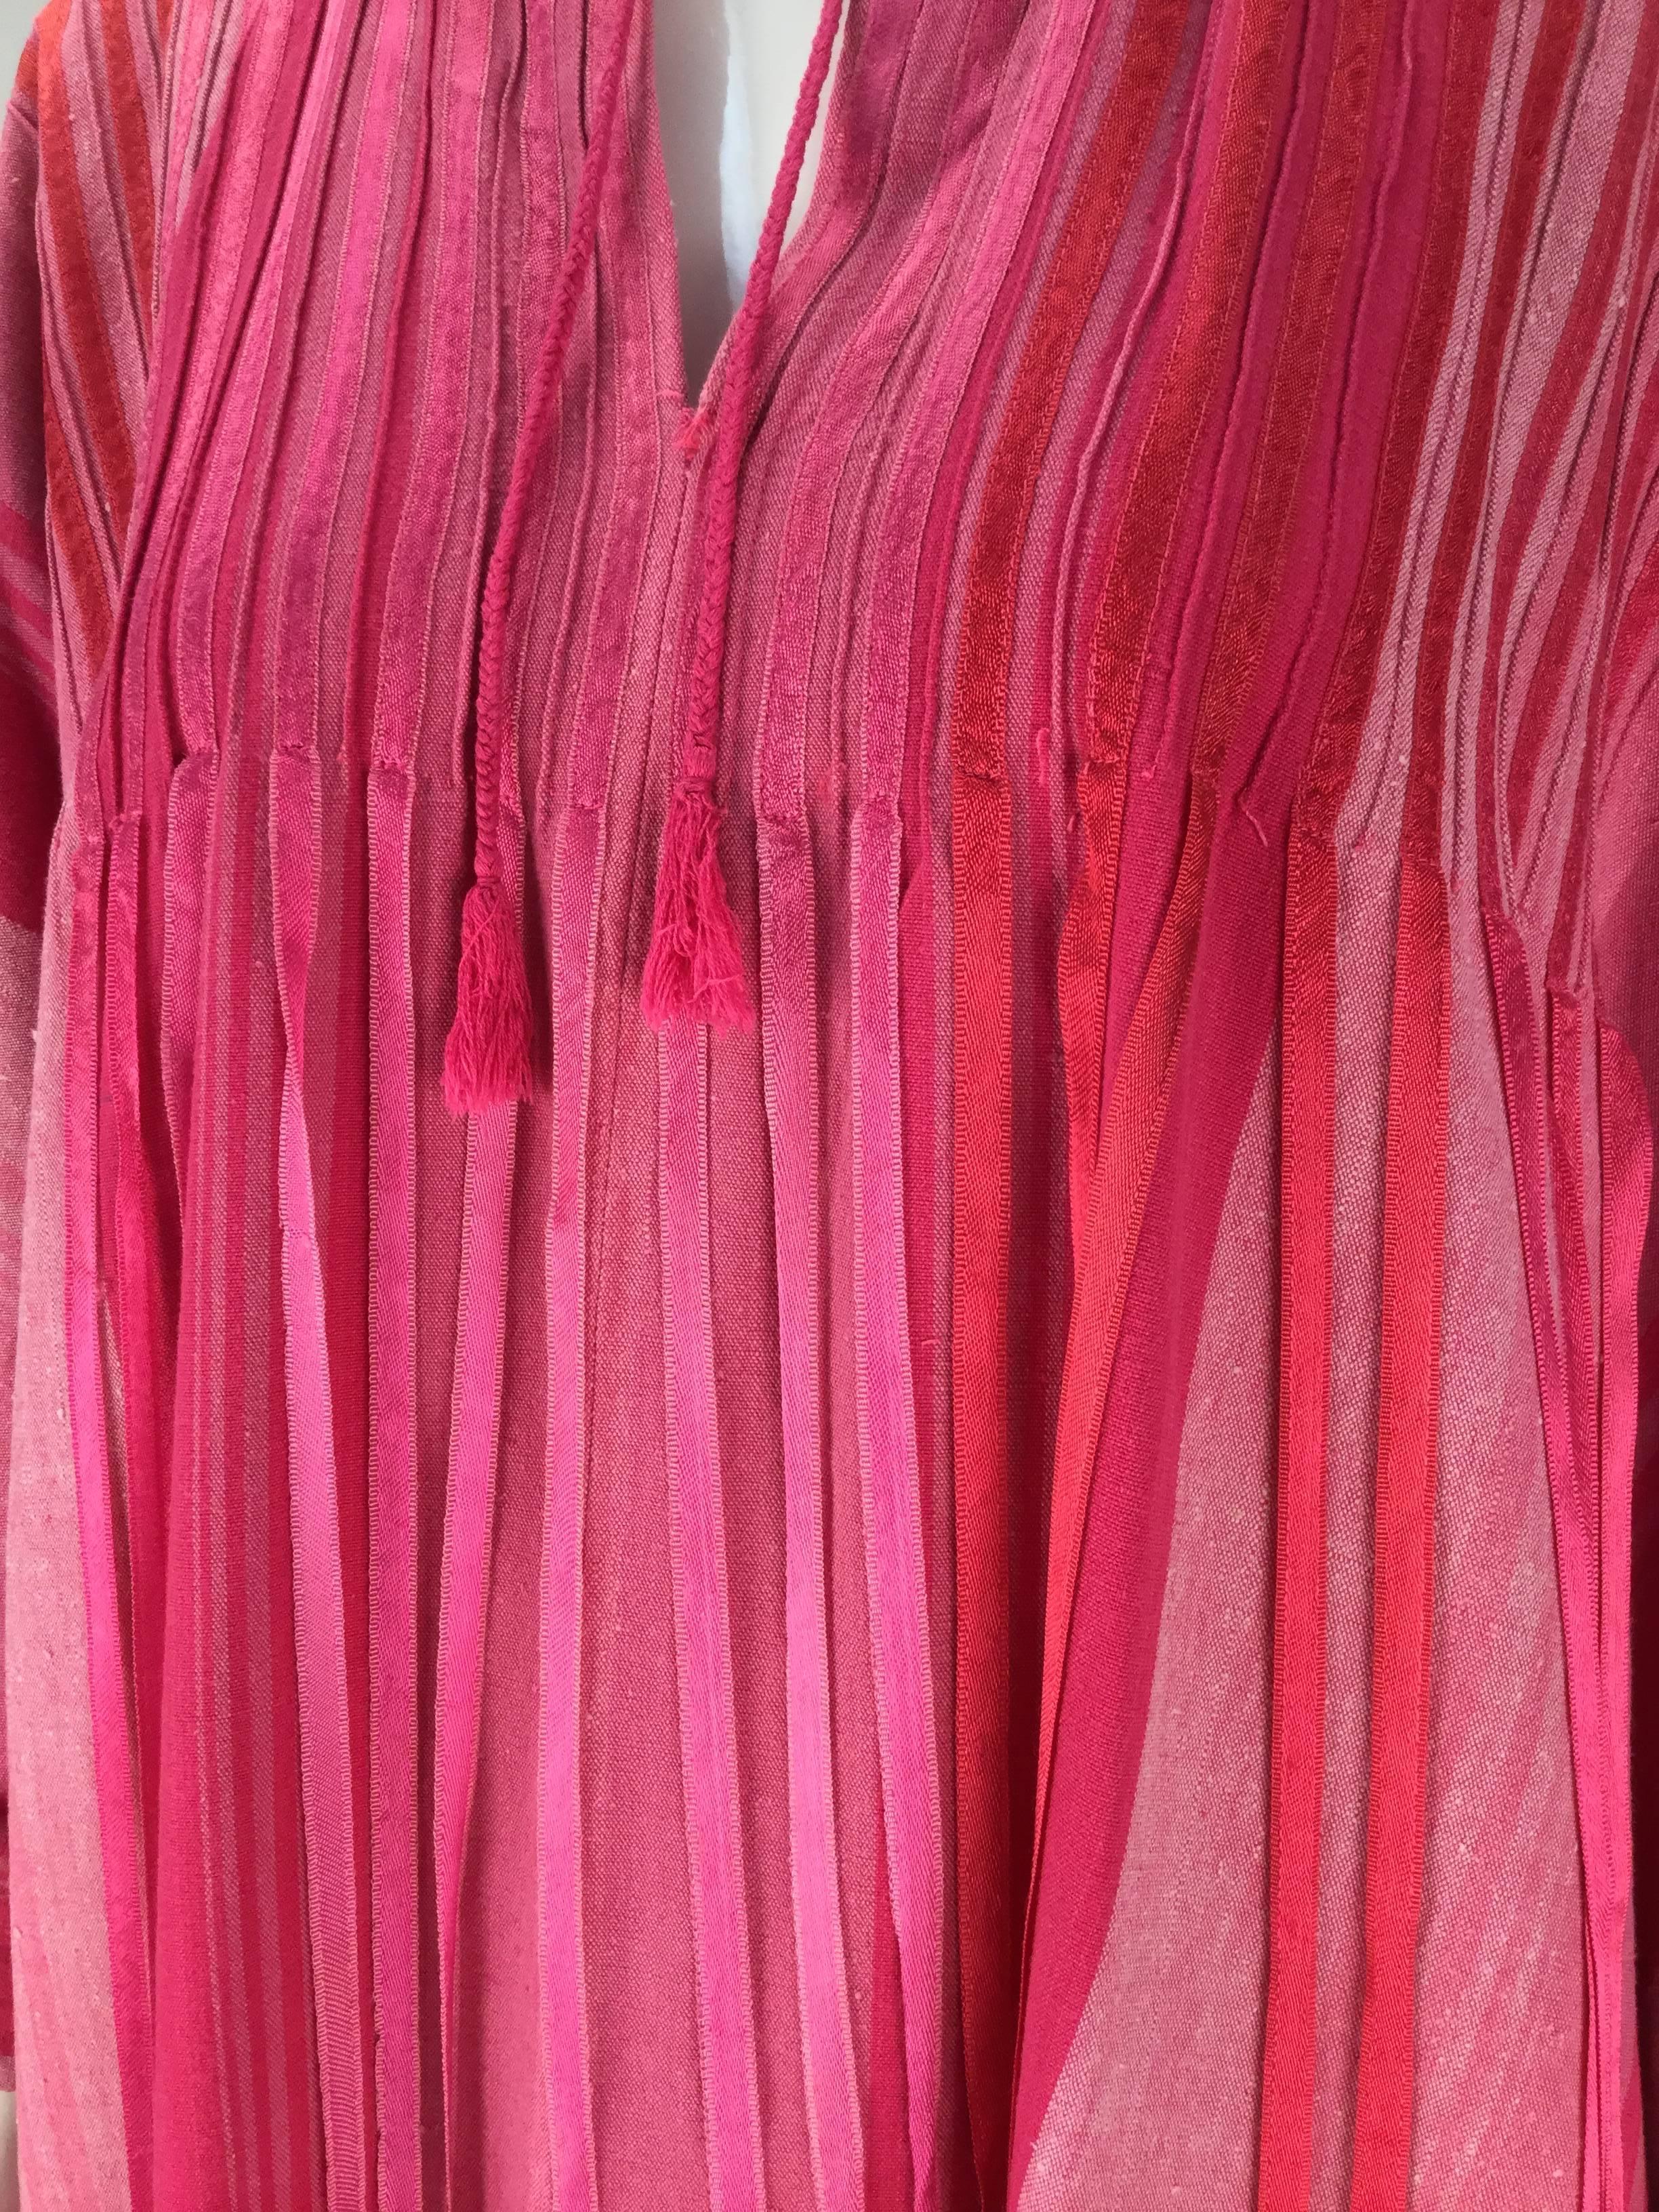 Stunning 1970s multi pink striped kaftan with ribbon trim by famed Mexican designer - Josefa. 100% cotton. It is made of brightly striped cotton in shades of pink with strips of satin ribbon that are stitched down to bust and then hang freely in a